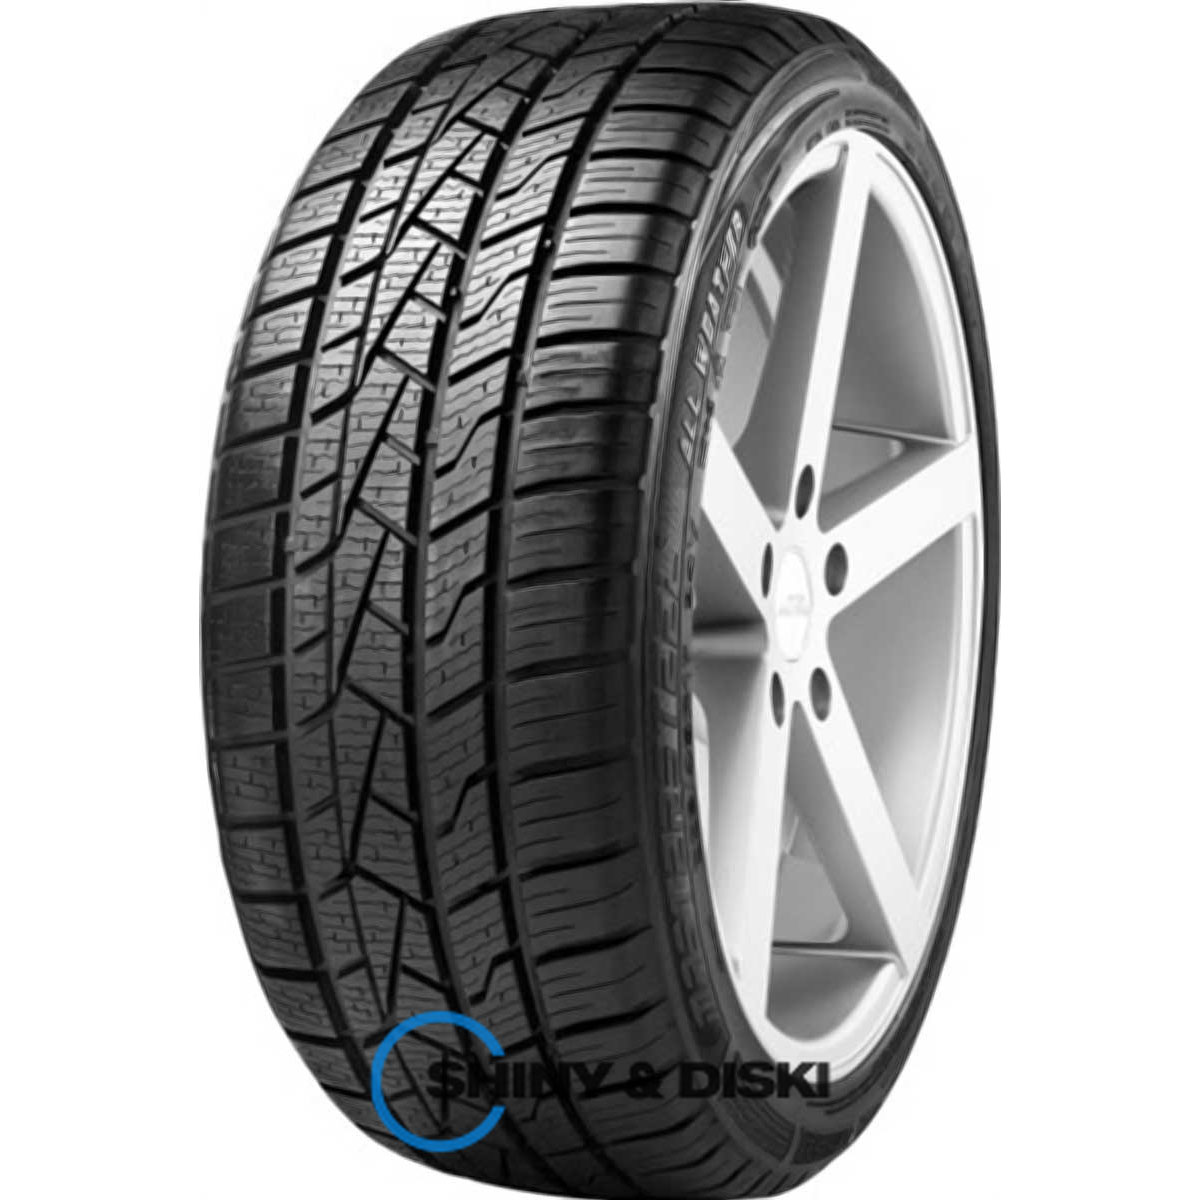 mastersteel all weather 155/65 r14 75t